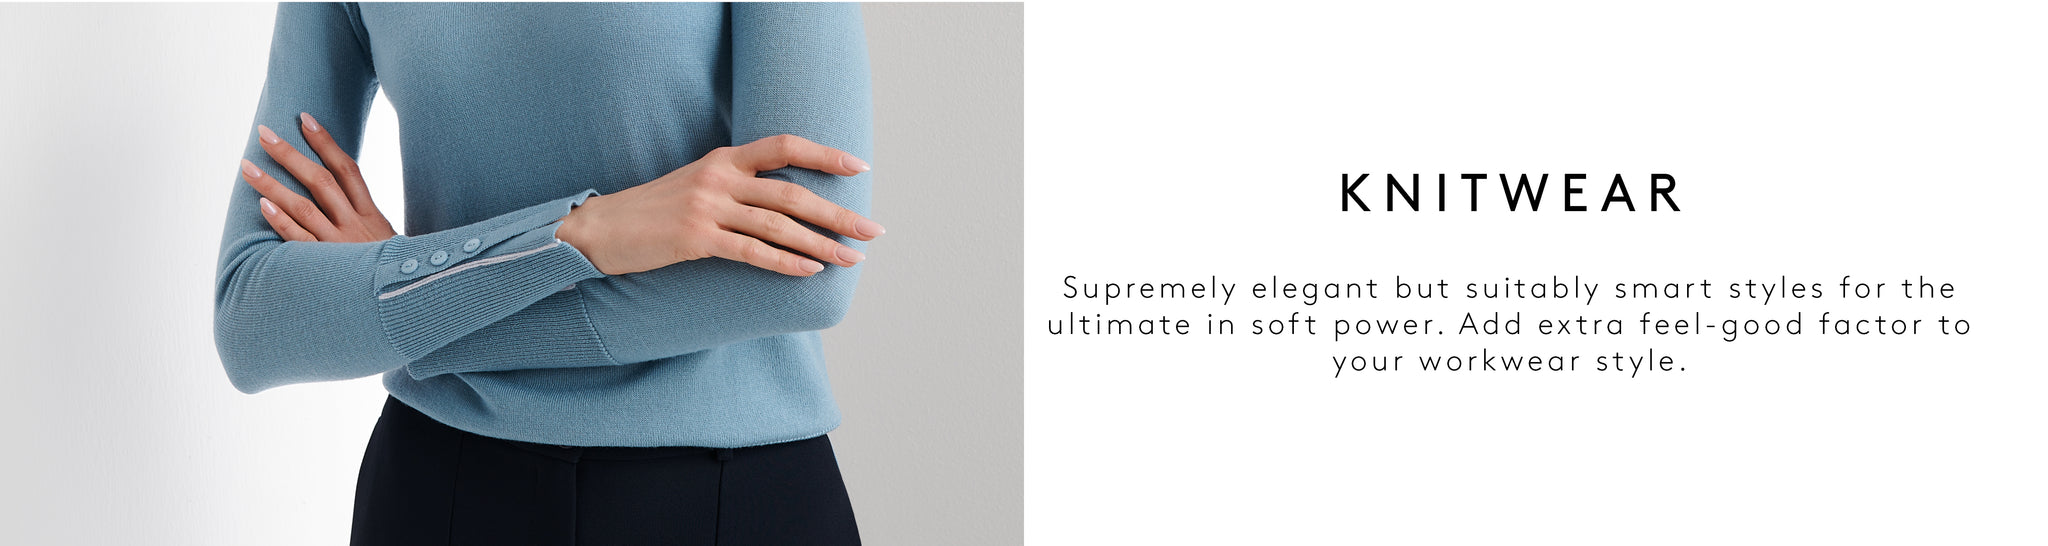 Supremely elegant but suitably smart styles for the ultimate in soft power. Add extra feel-good factor to your workwear style.